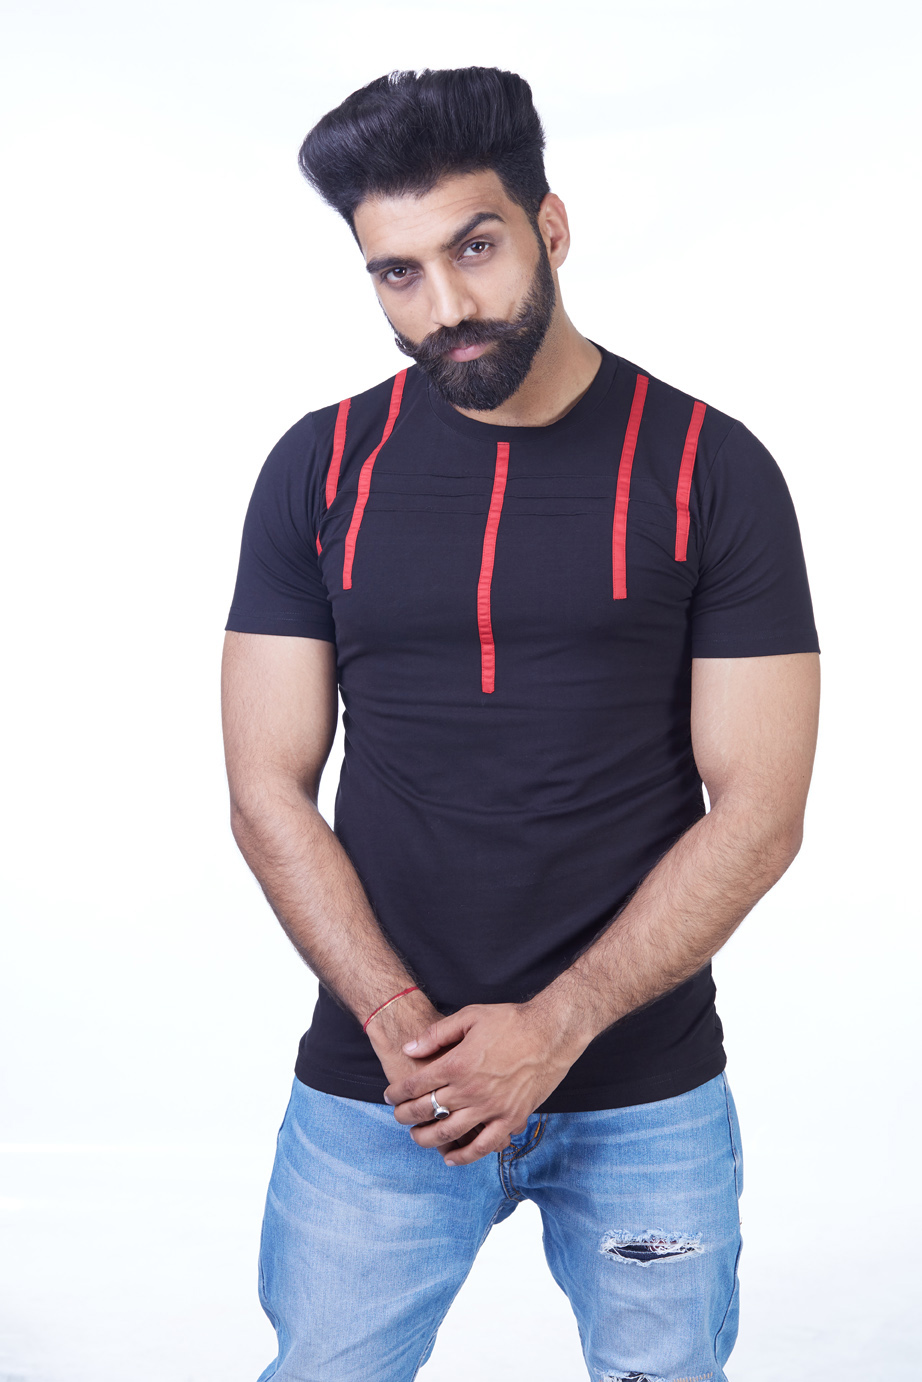 Men's T-shirts manufacturer & suppliers in Ludhiana, Punjab, India